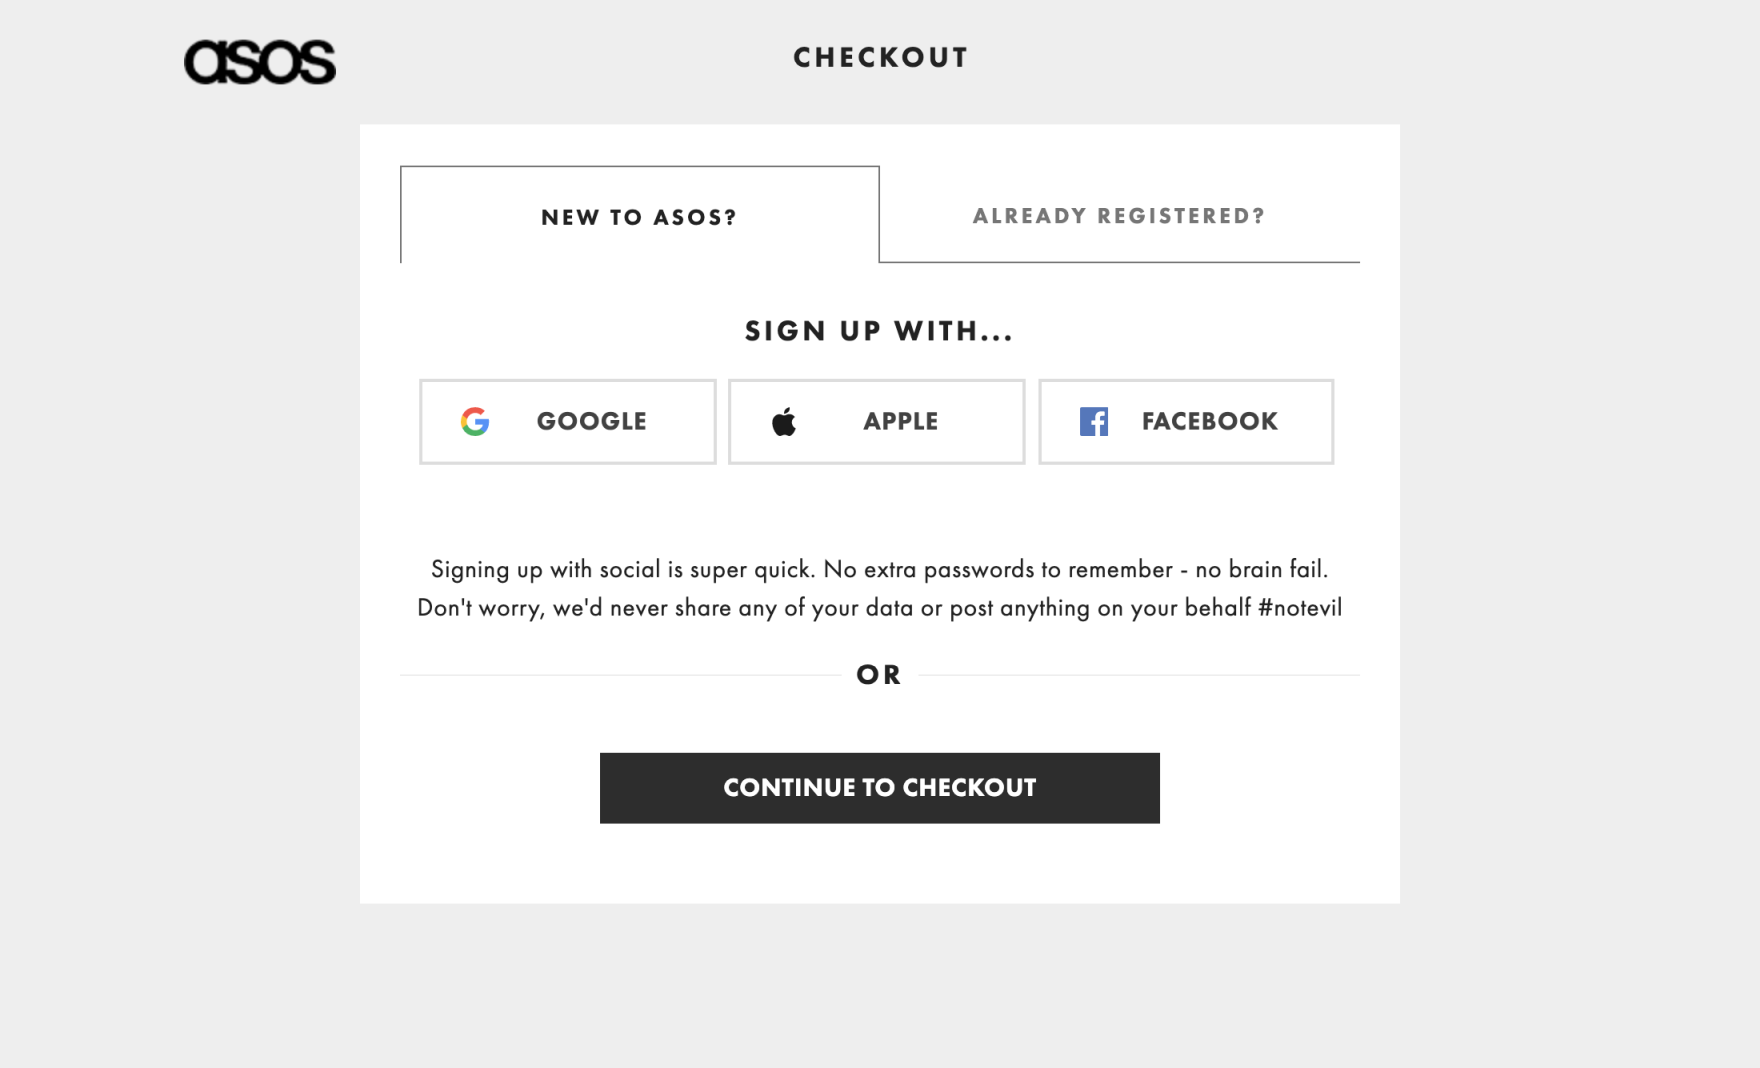 Grocery and Food Delivery Site UX: Allow Users to Add “Past Purchases” to  the Cart from the Homepage – Articles – Baymard Institute